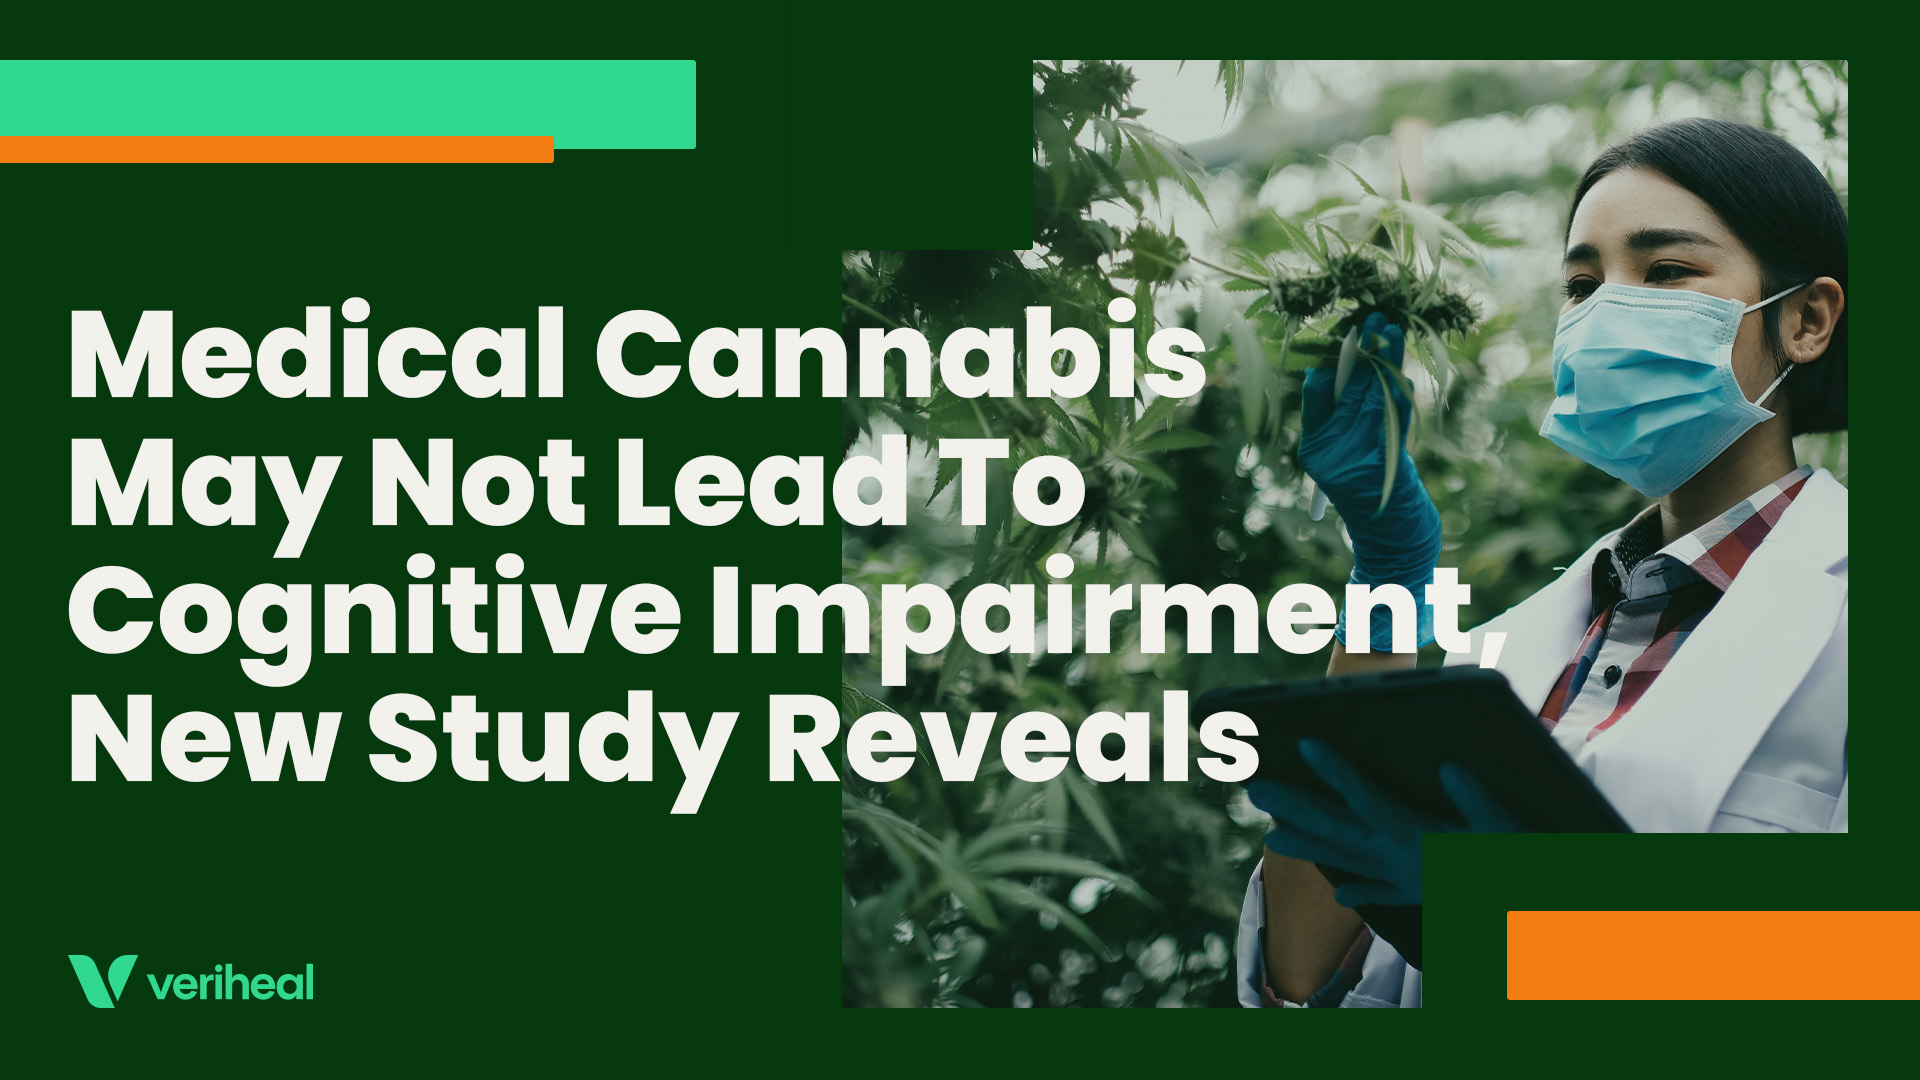 Medical Cannabis May Not Lead To Cognitive Impairment, New Study Reveals